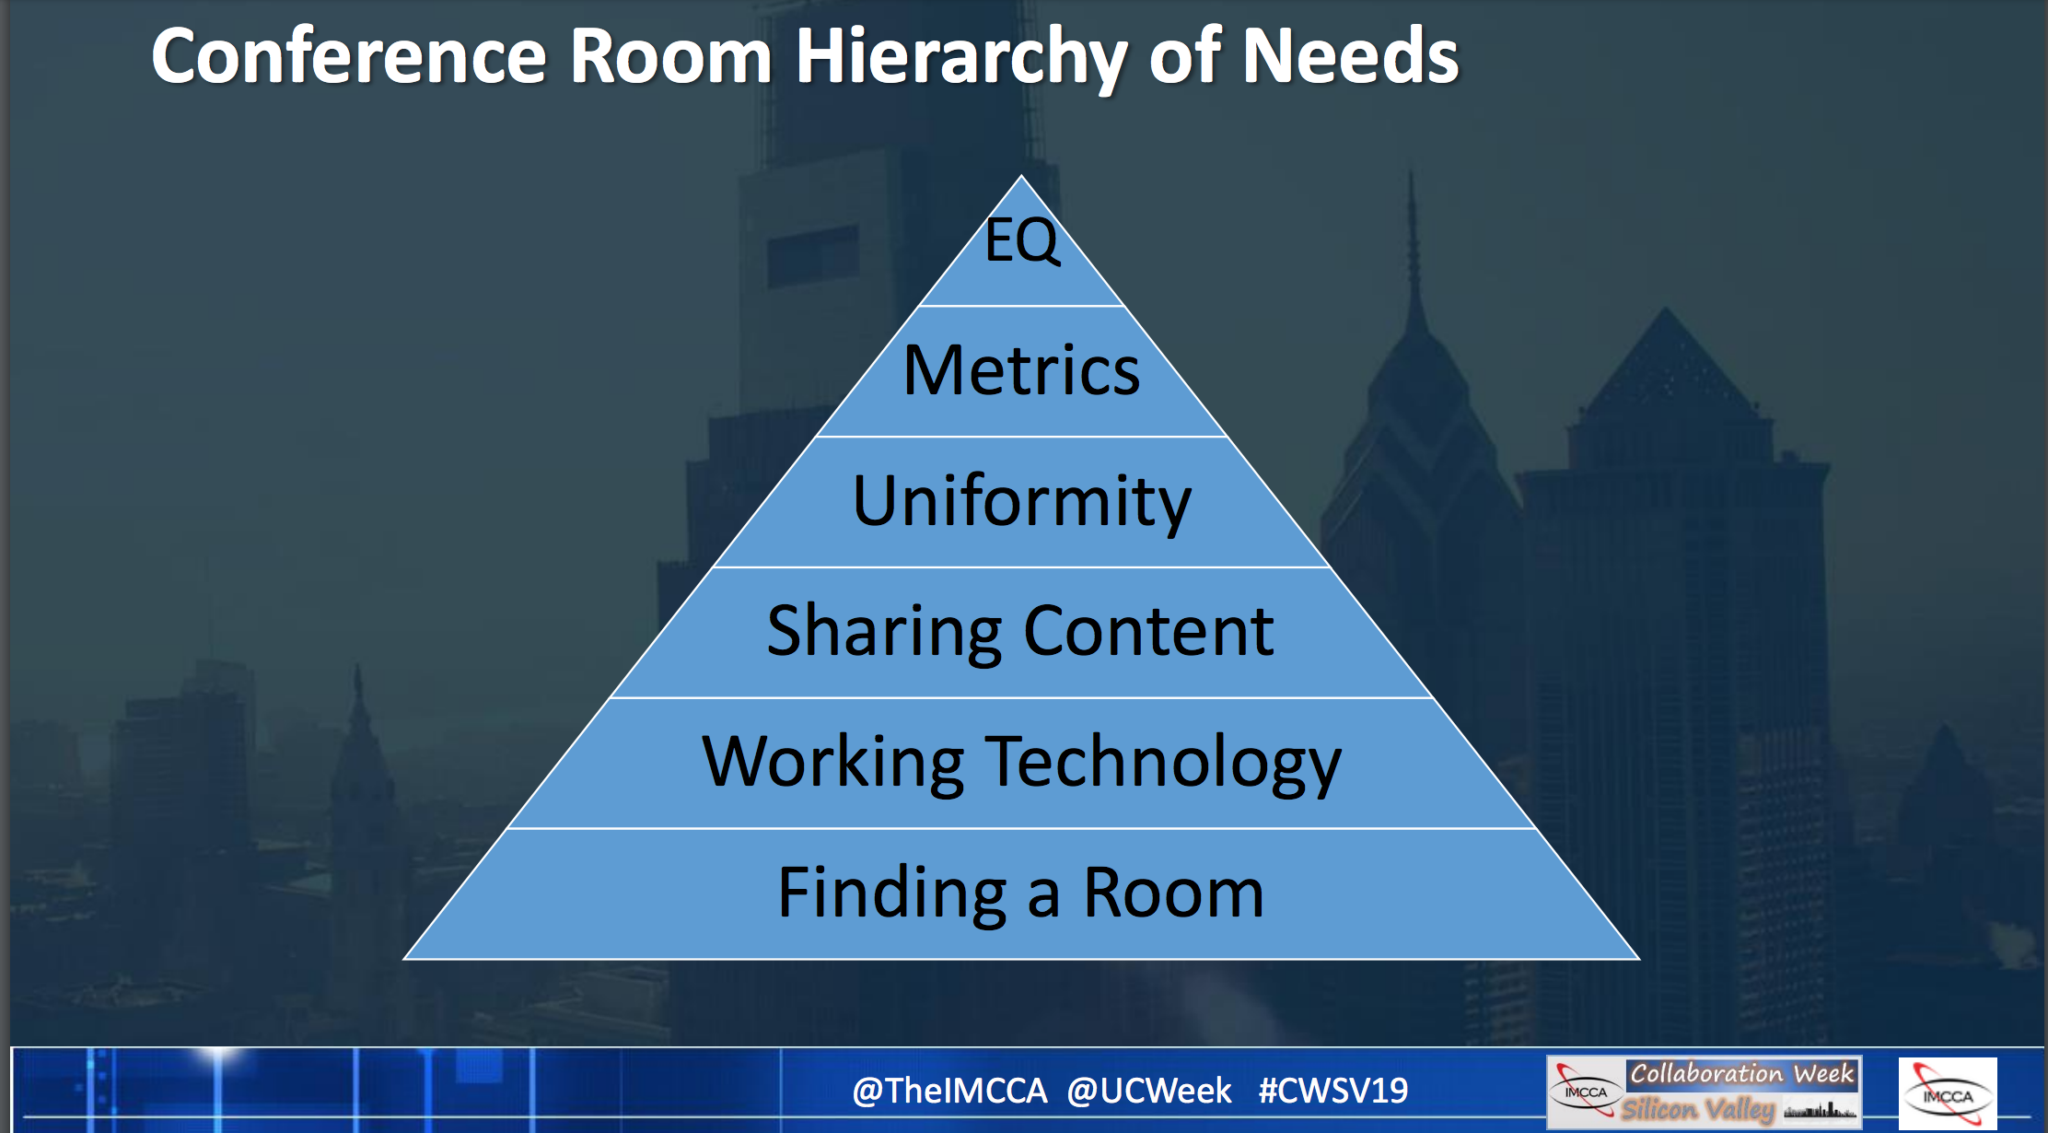 Conference Room Hierarchy of Needs